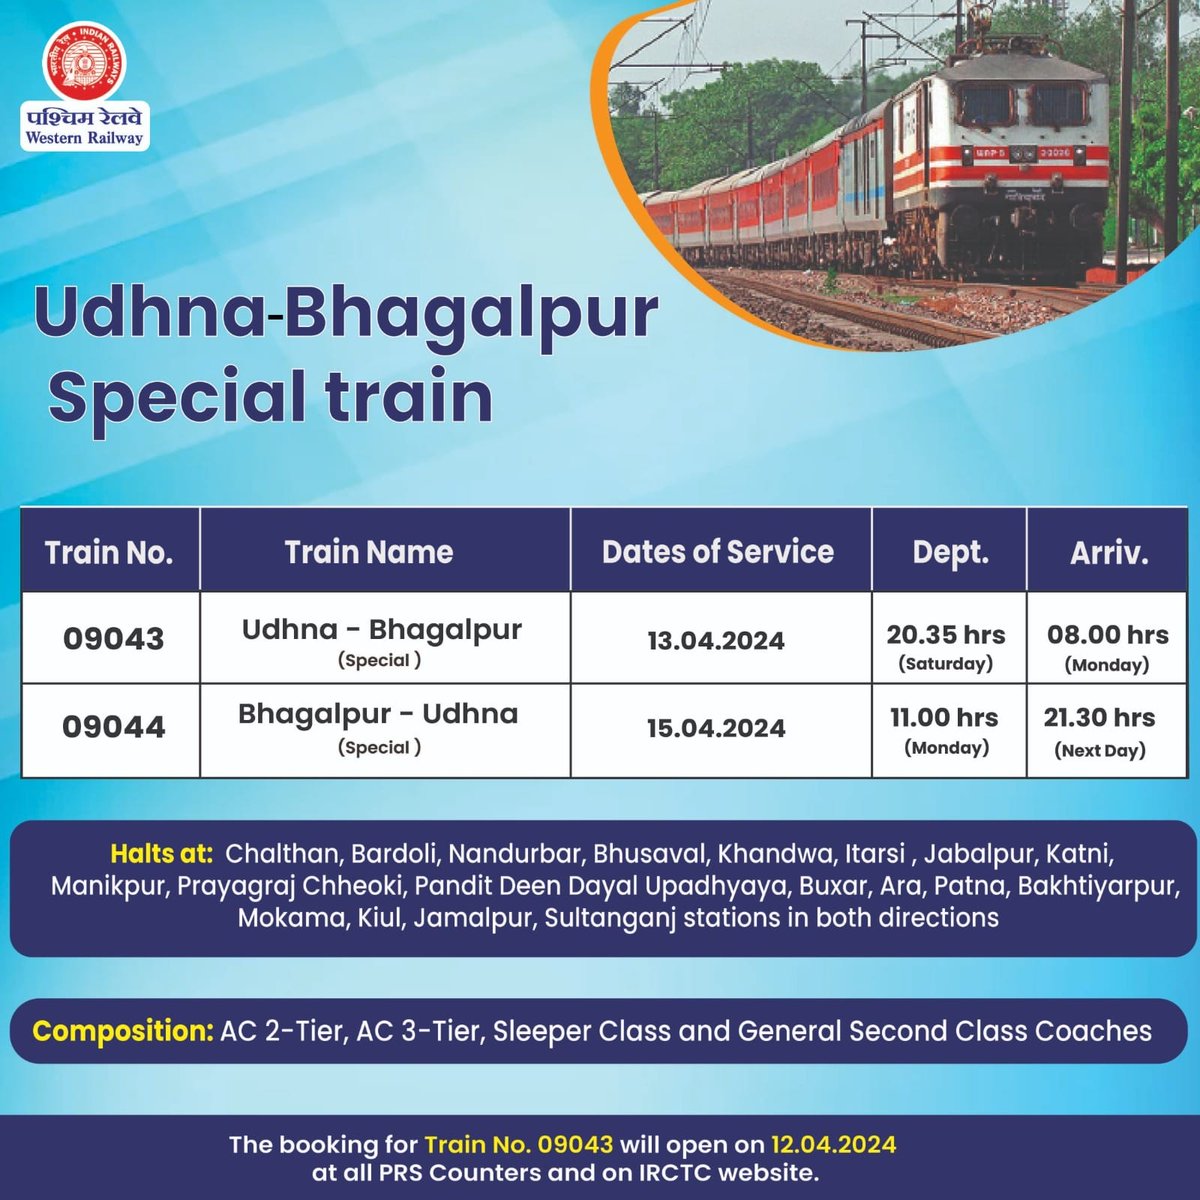 For the convenience of passengers and to meet the travel demand, WR has decided to run a Special Train between Udhna and Bhagalpur. The booking for train no. 09043 will open on 12 April 2024, Friday at PRS counters and IRCTC website. #WRUpdates